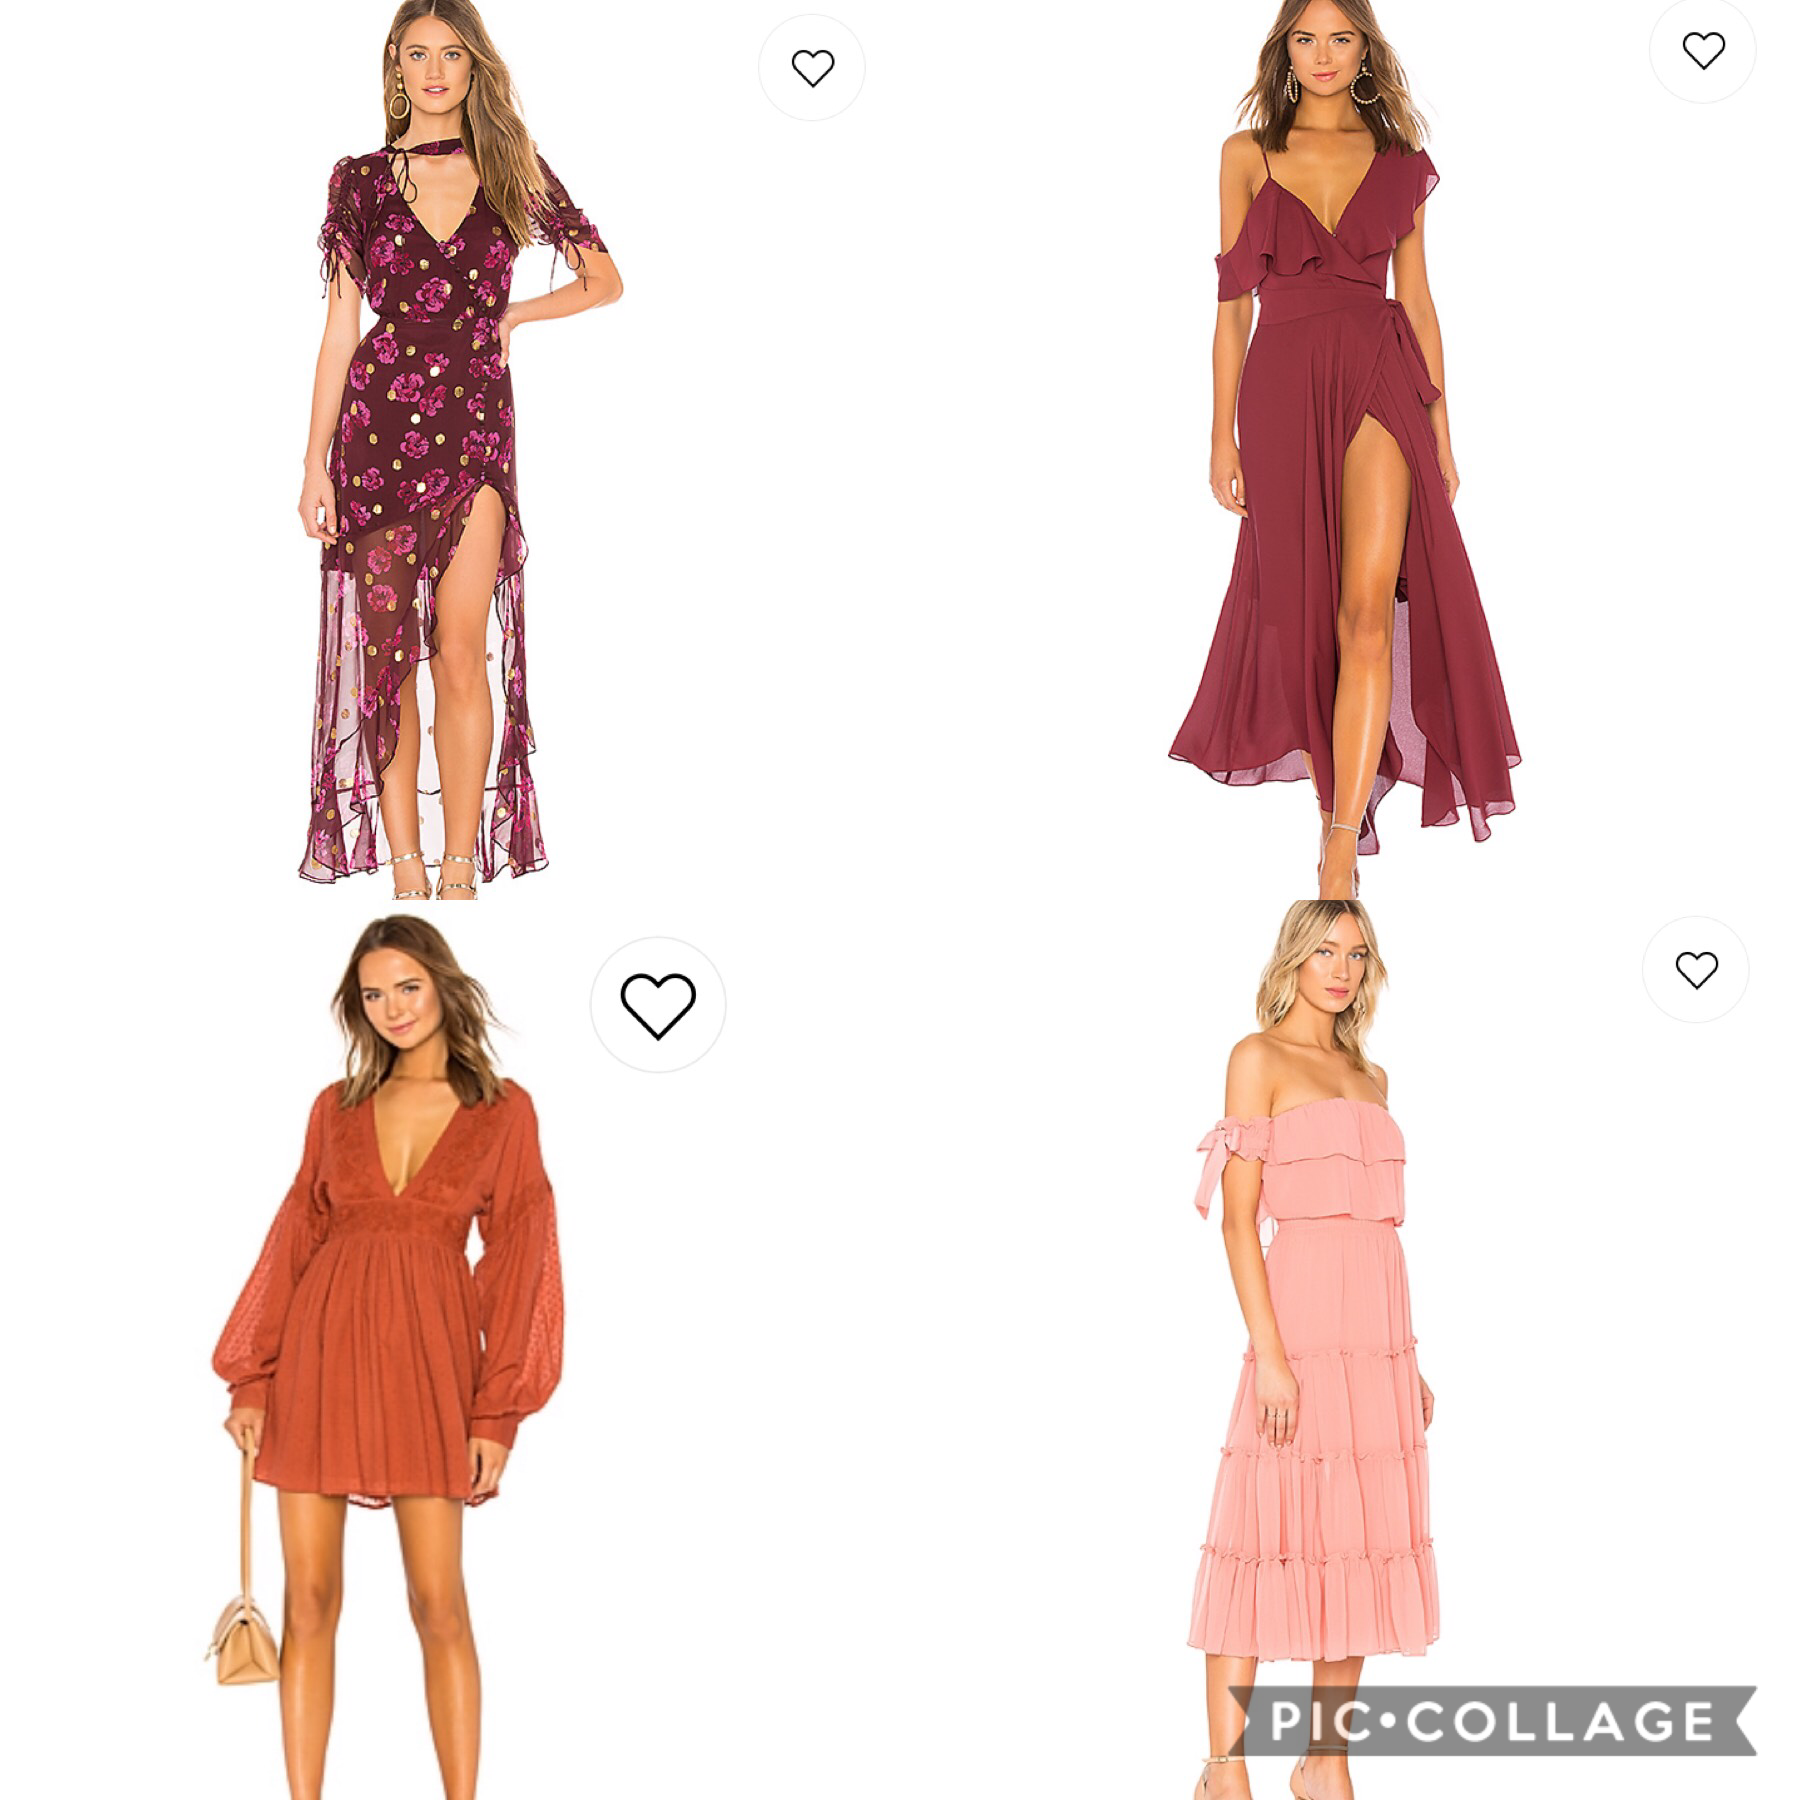 IDK WHAT TO CHOOSE :( i have weddin in the summer and this is the closest i could get to “summer” clothes. I had to restrain myself from getting jewel tone turtleneck dresses and forced myself to get jewel toned flowy dresses lol